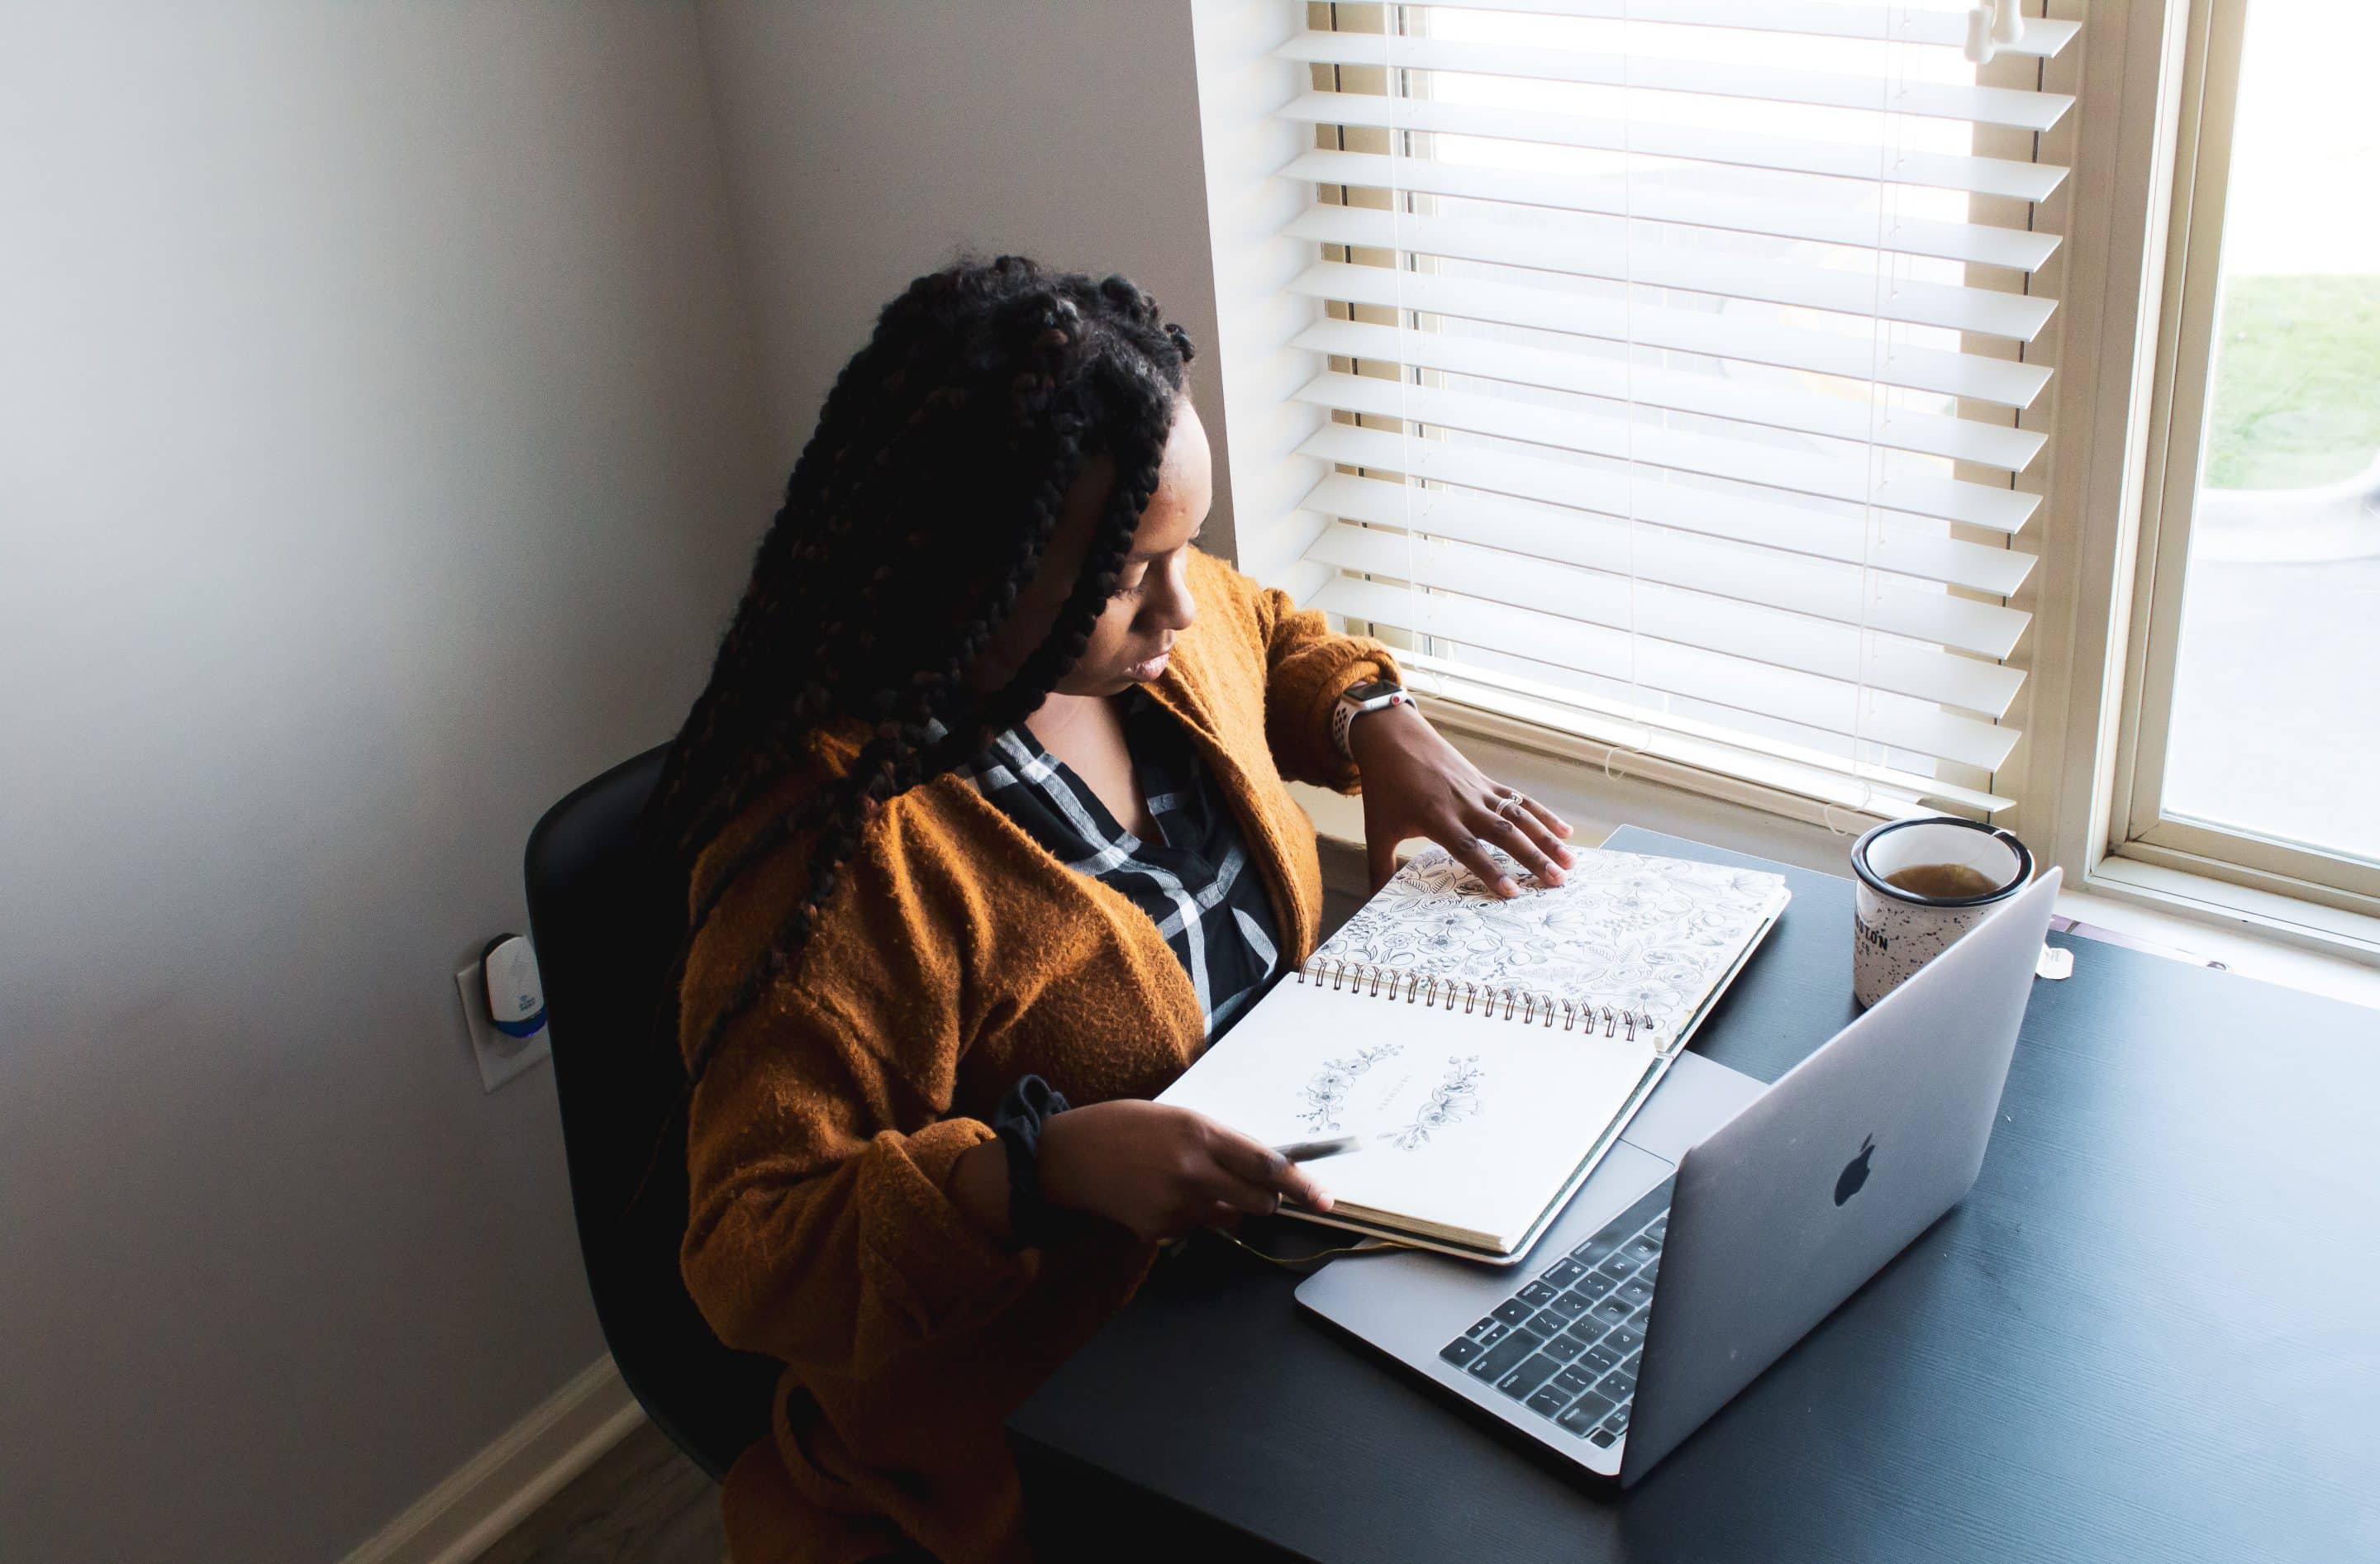 image of woman at desk with planner and laptop from unsplash.com